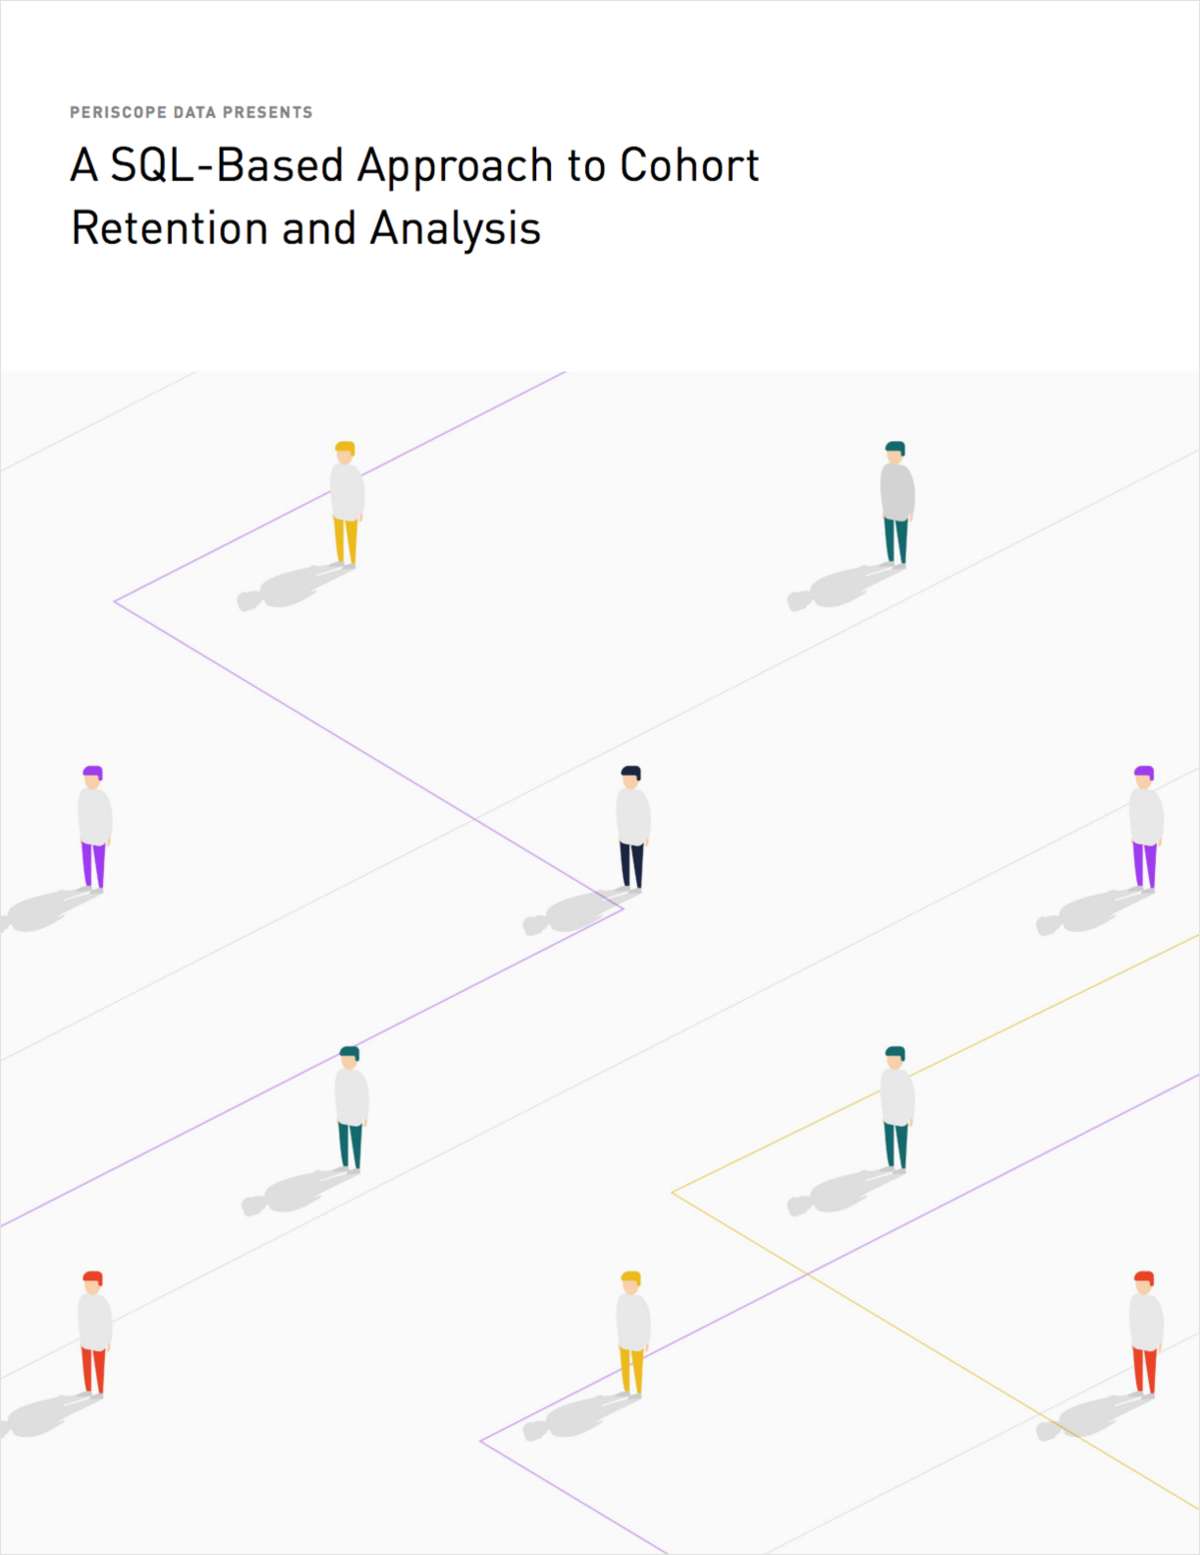 Periscope Data Presents: A SQL-Based Approach to Cohort Retention and Analysis.